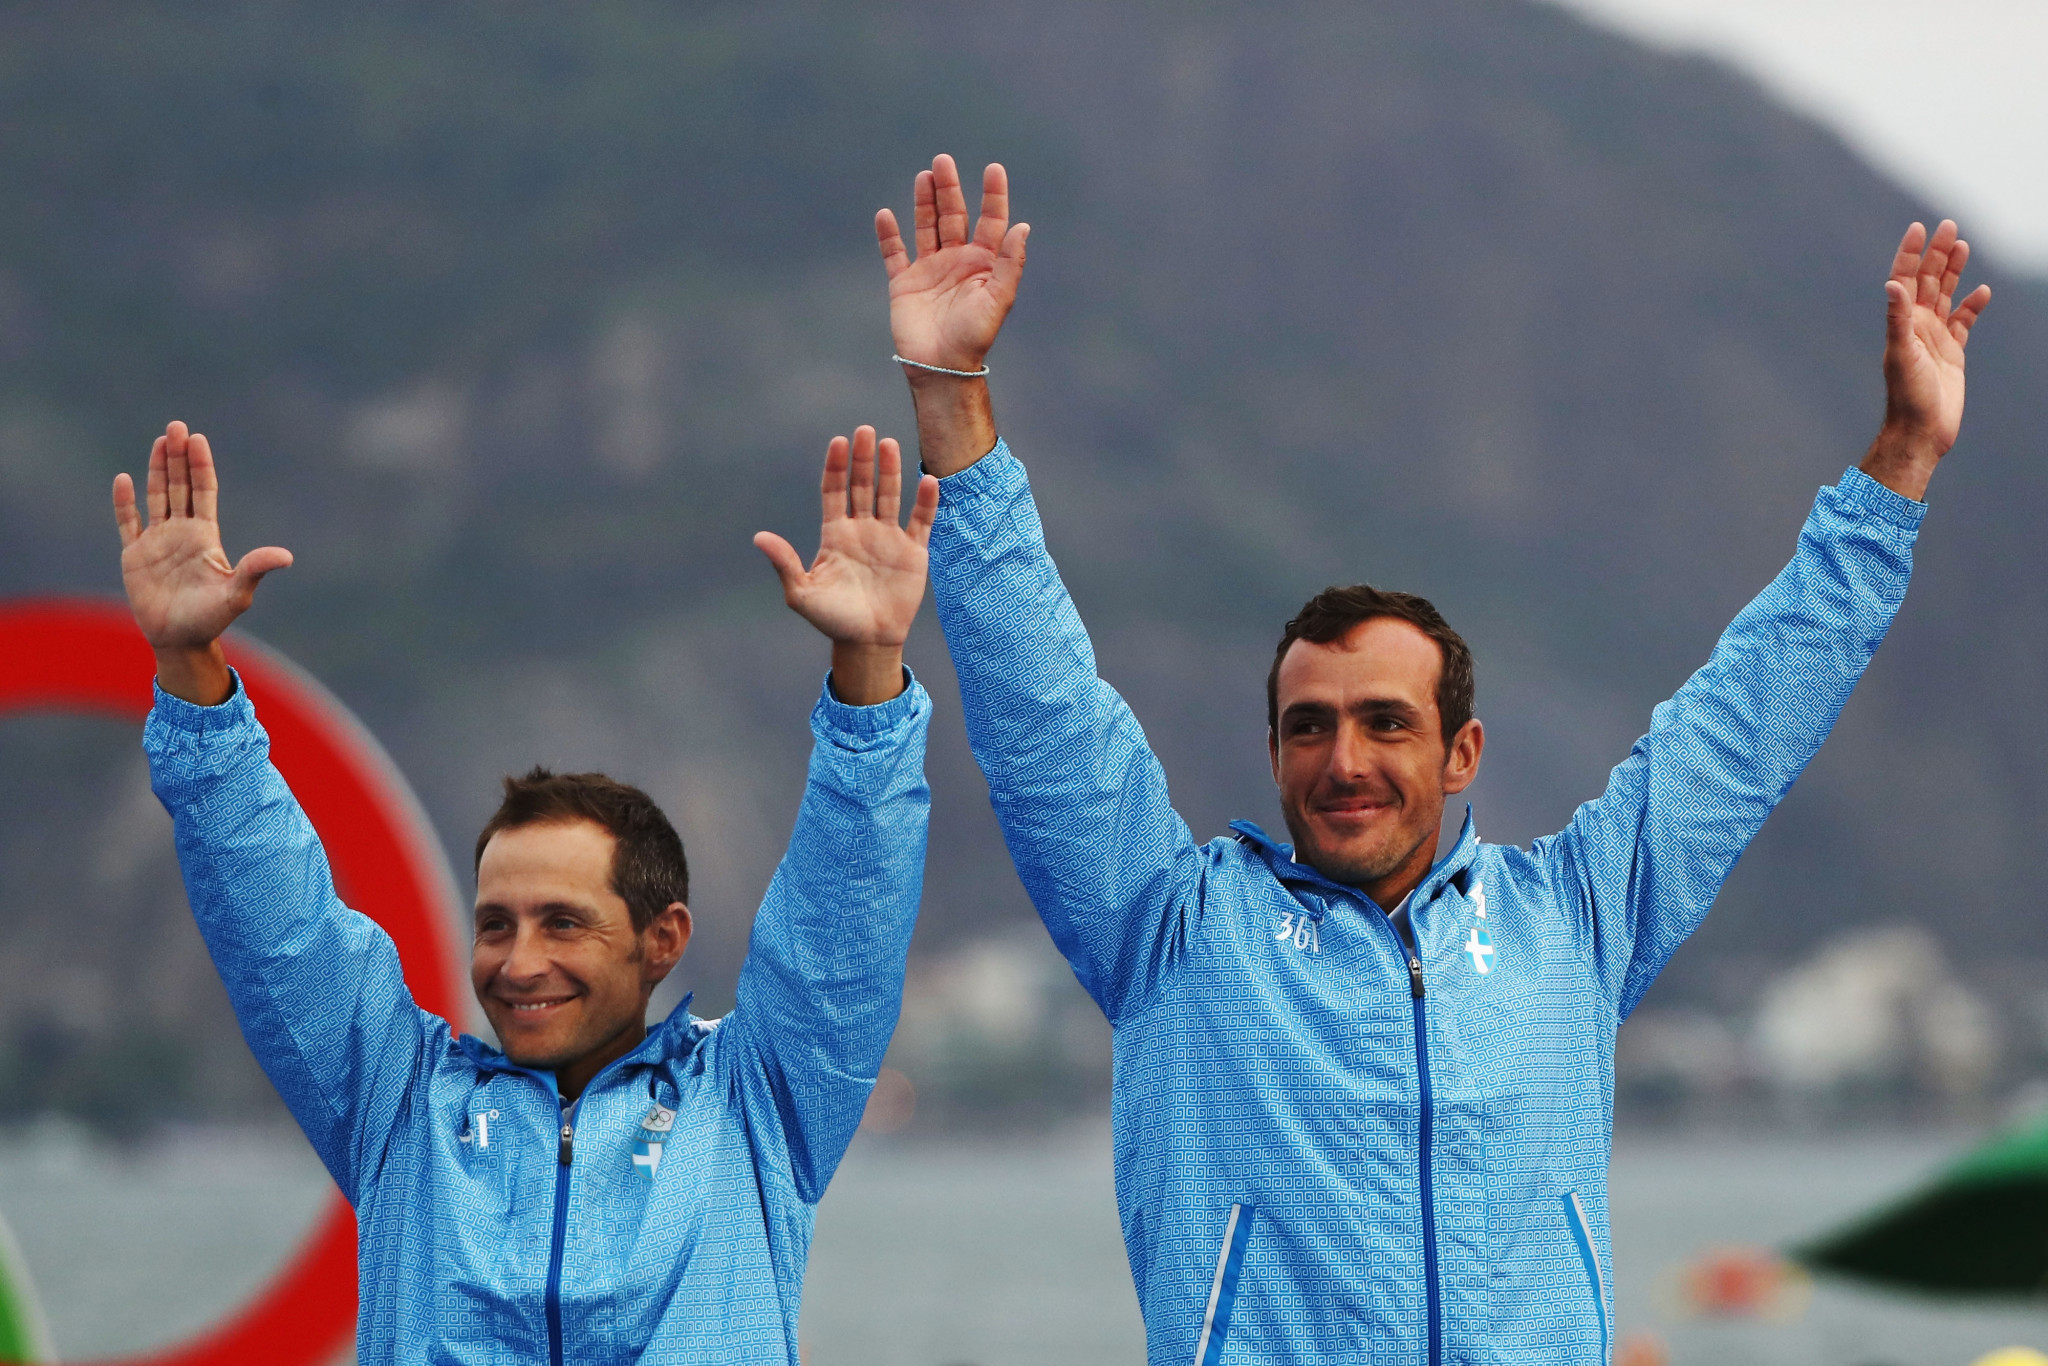 Olympic sailing bronze medallists Panagiotis Mantis and Pavlos Kagialis are supporting the work in Lesbos ©Getty Images